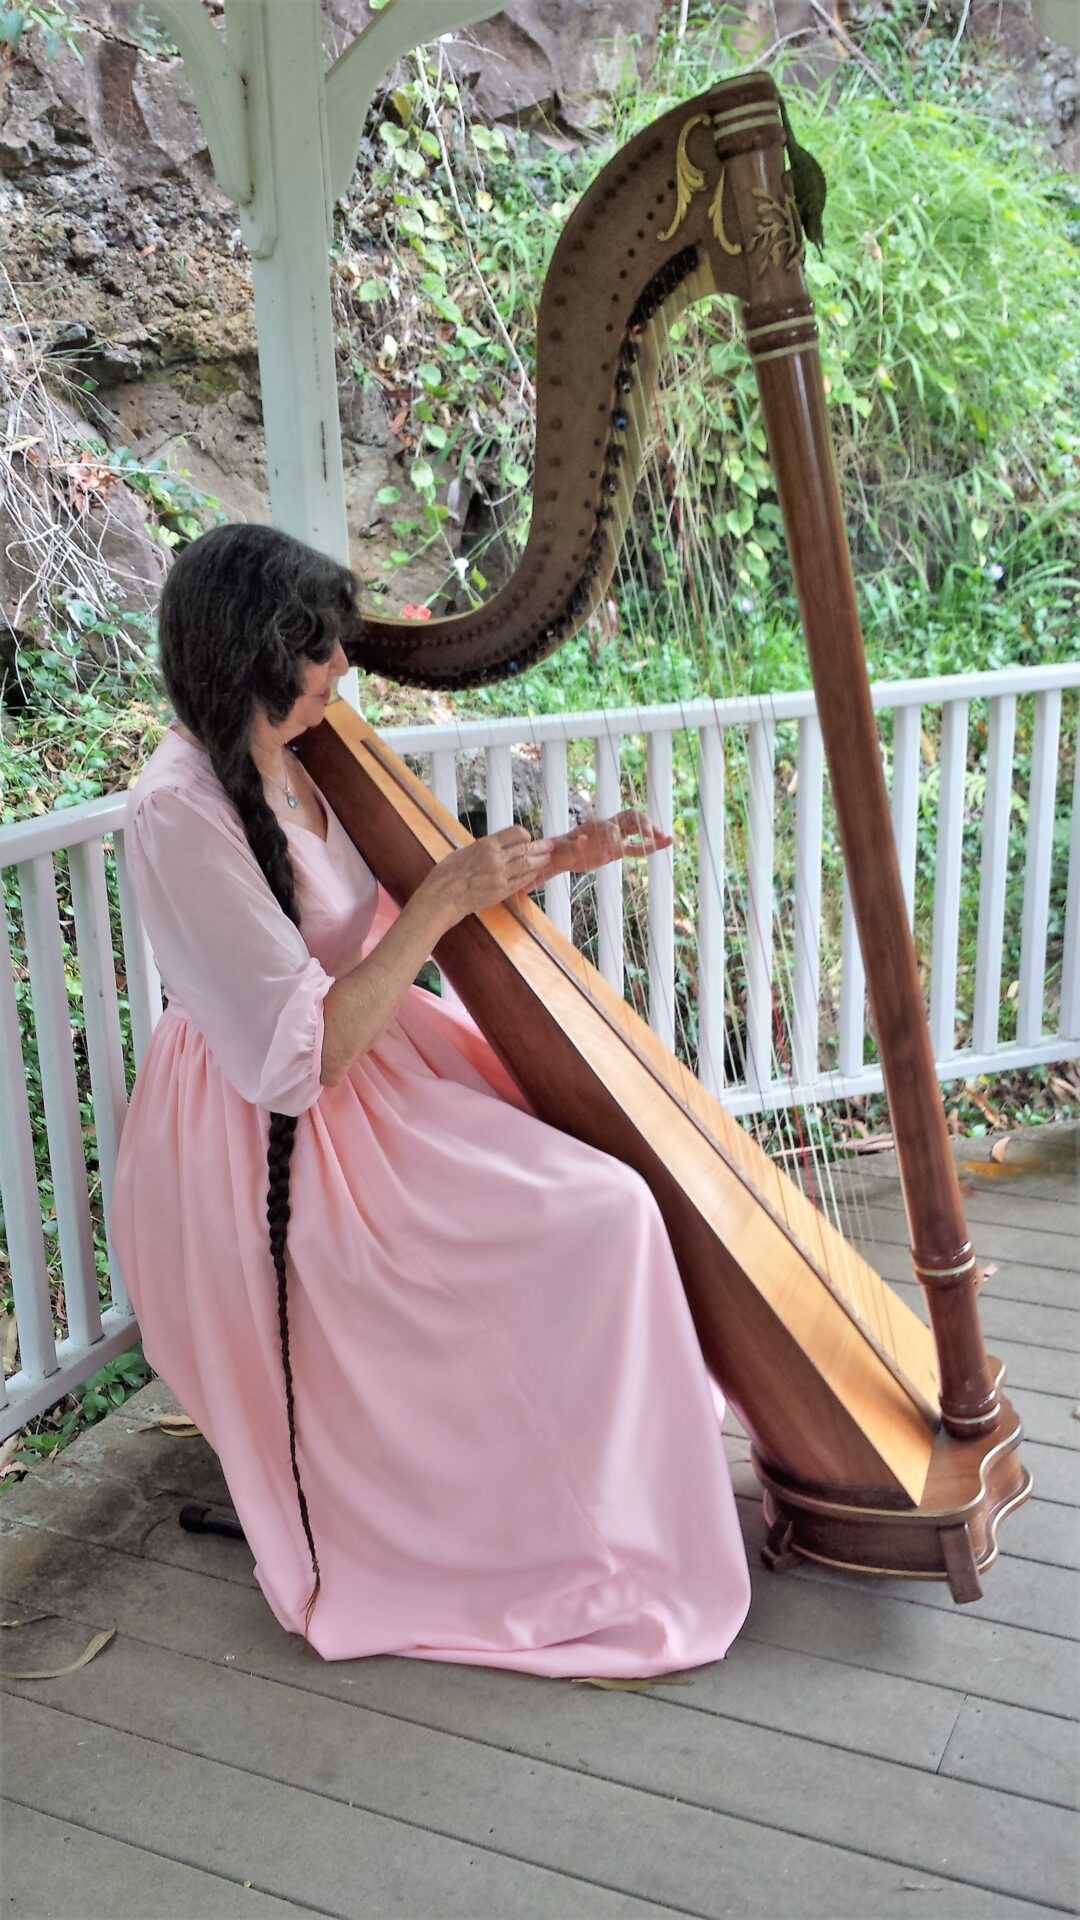 A Musician Playing Ginny Harp So Well